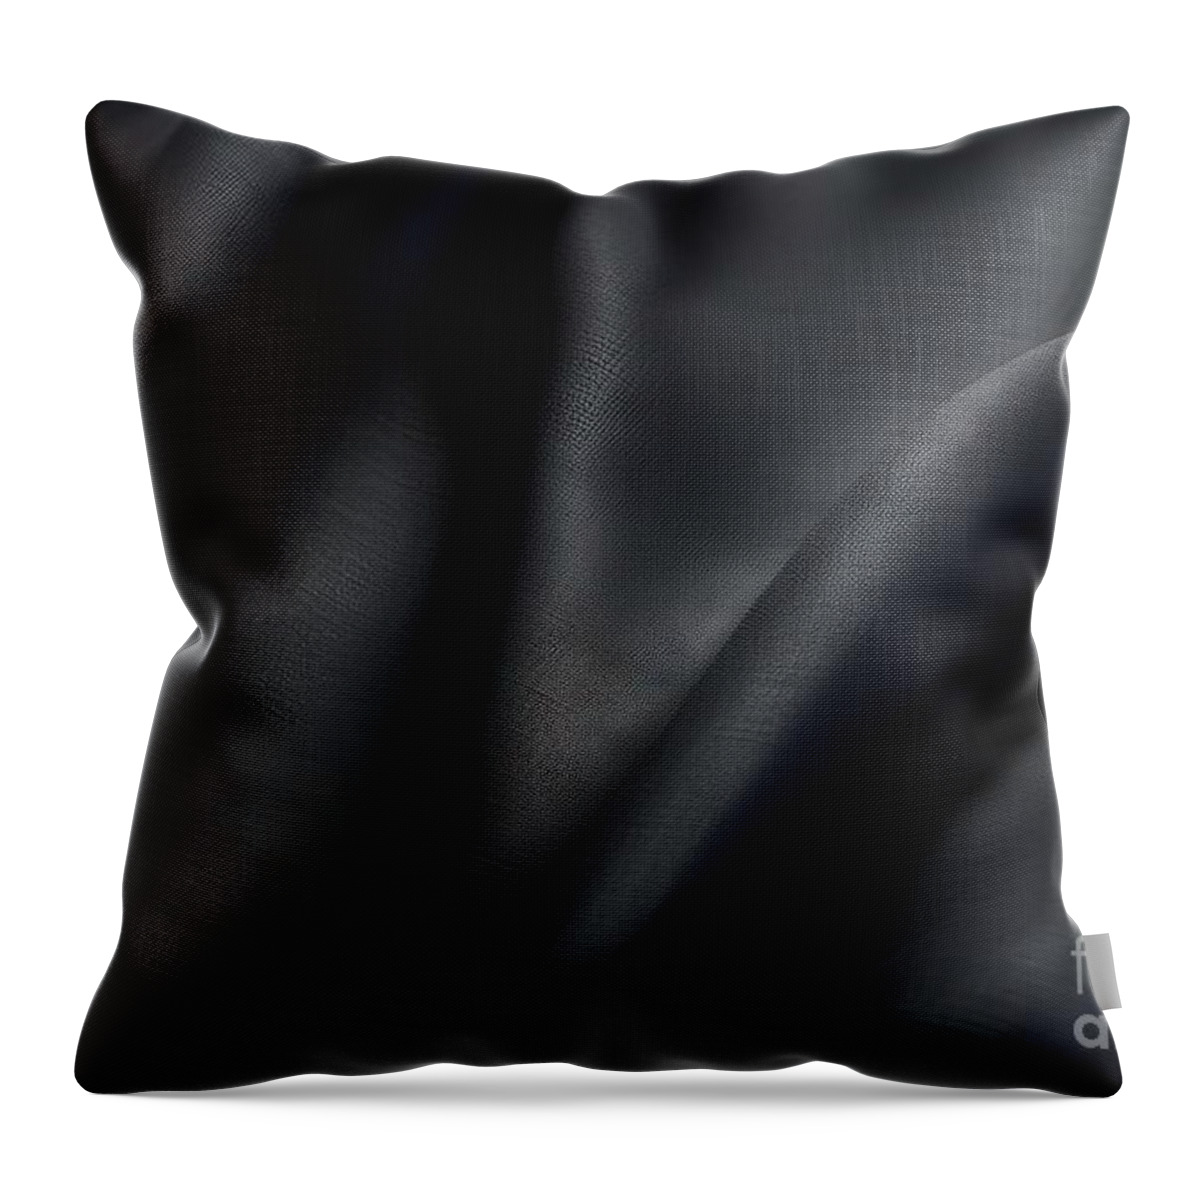 Isolated Throw Pillow featuring the painting Black Flag Cloth In Full Frame With Selective Focus 3d Illustration Of Pitch Dark Colored Garment With Clean Natural Linen Texture For Background Banner Or Wallpaper Use by N Akkash